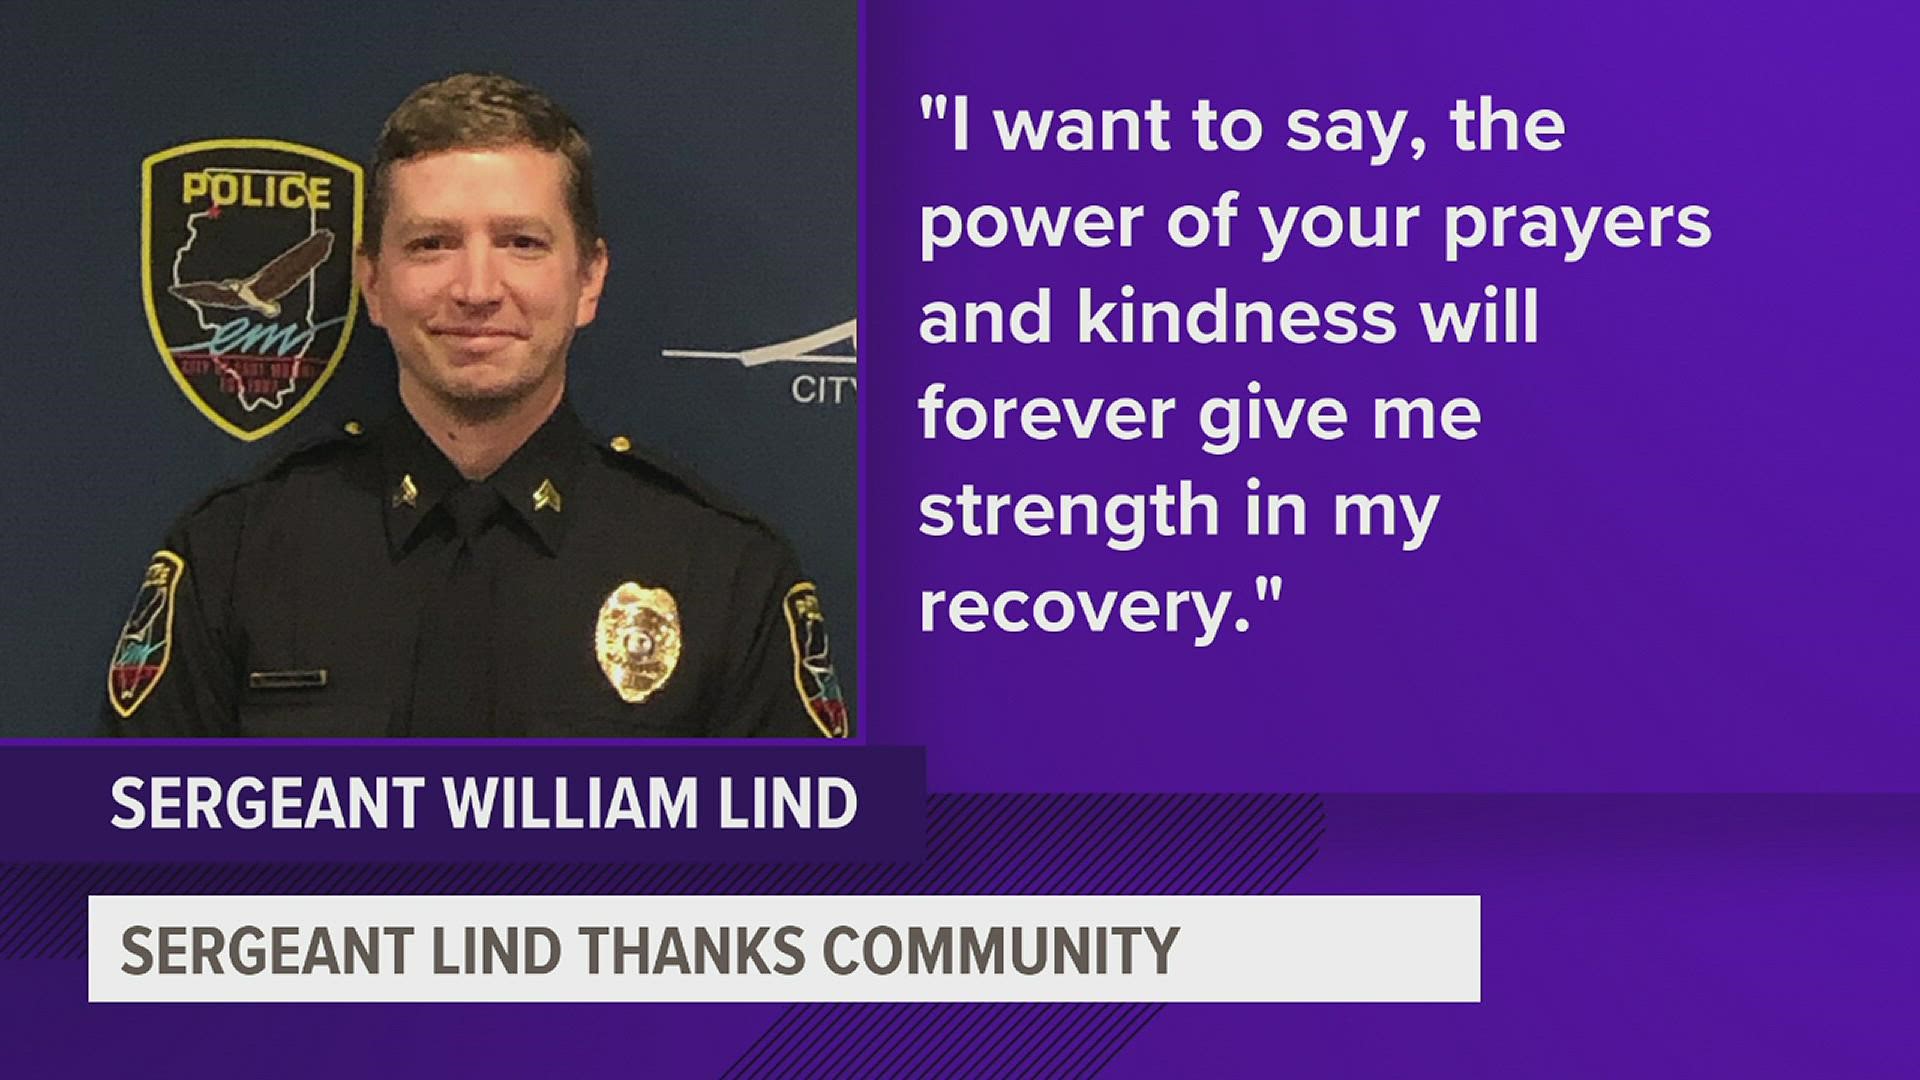 "I want to say, the power of your prayers and kindness will forever give me strength in my recovery," Lind said in a statement ahead of Thanksgiving.